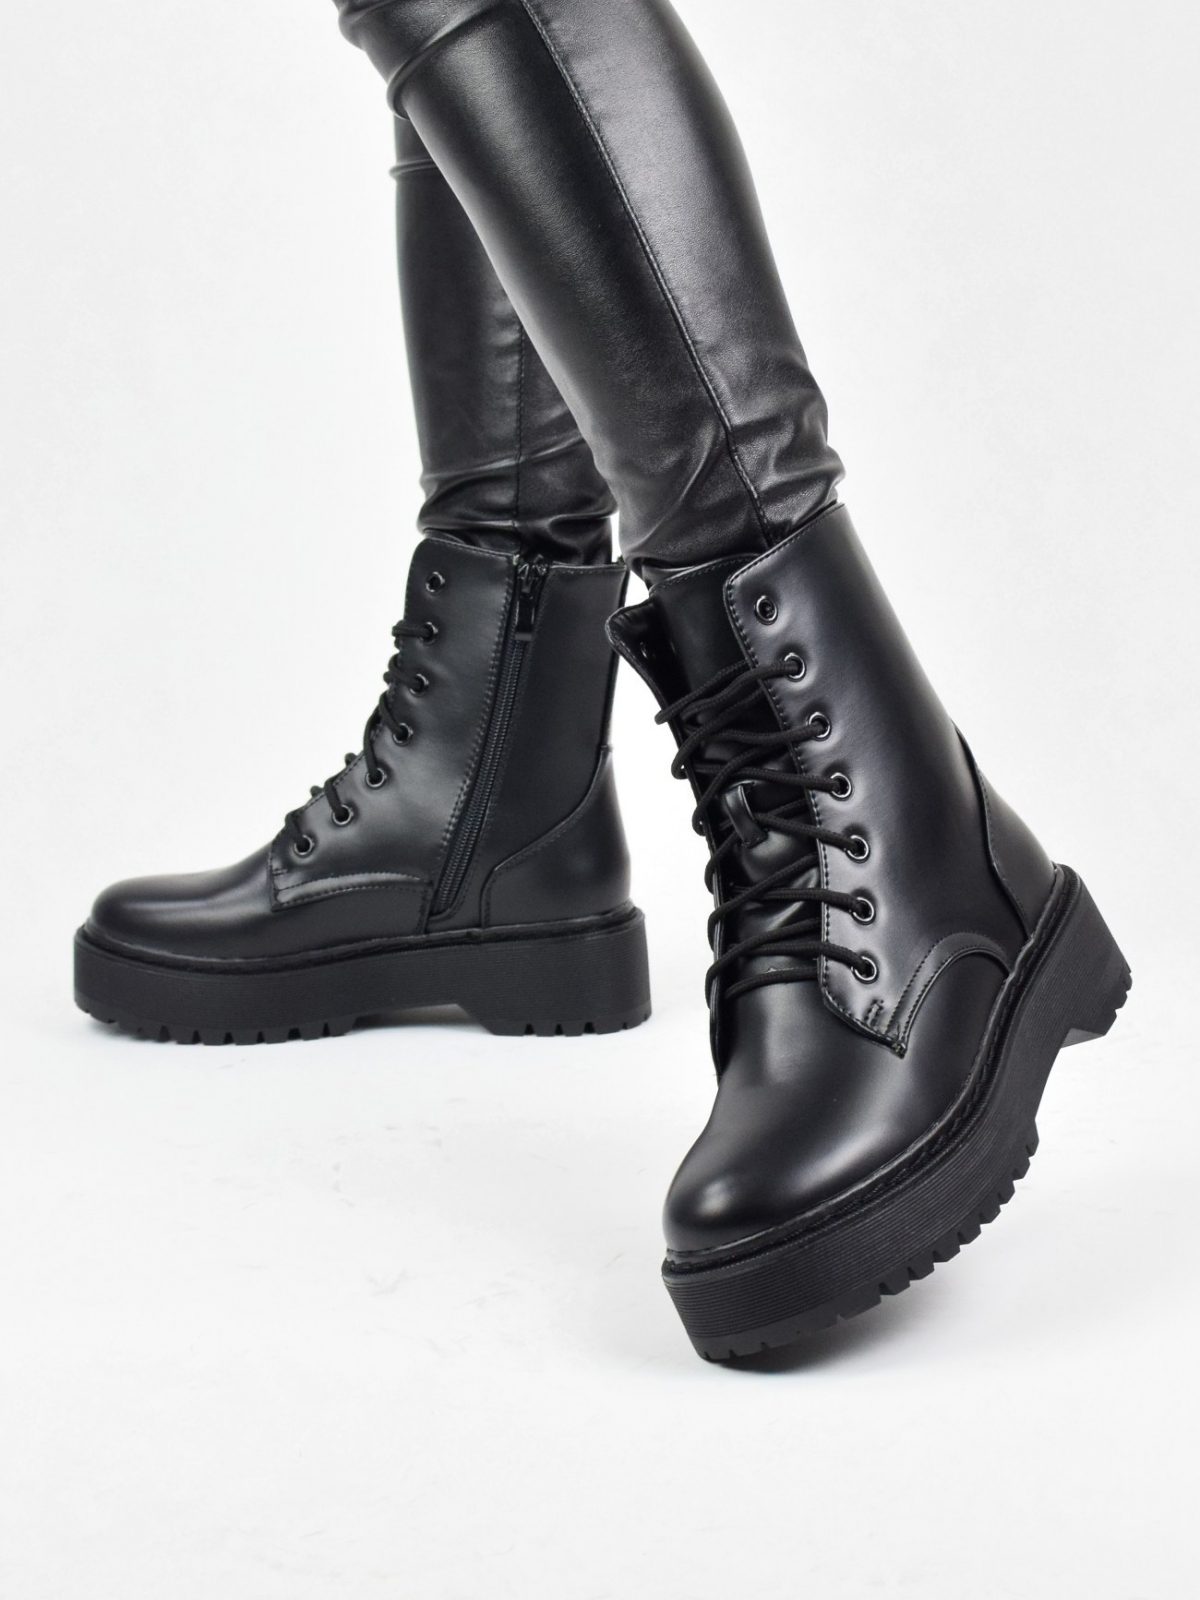 Classic design lace up ankle boots in black matte